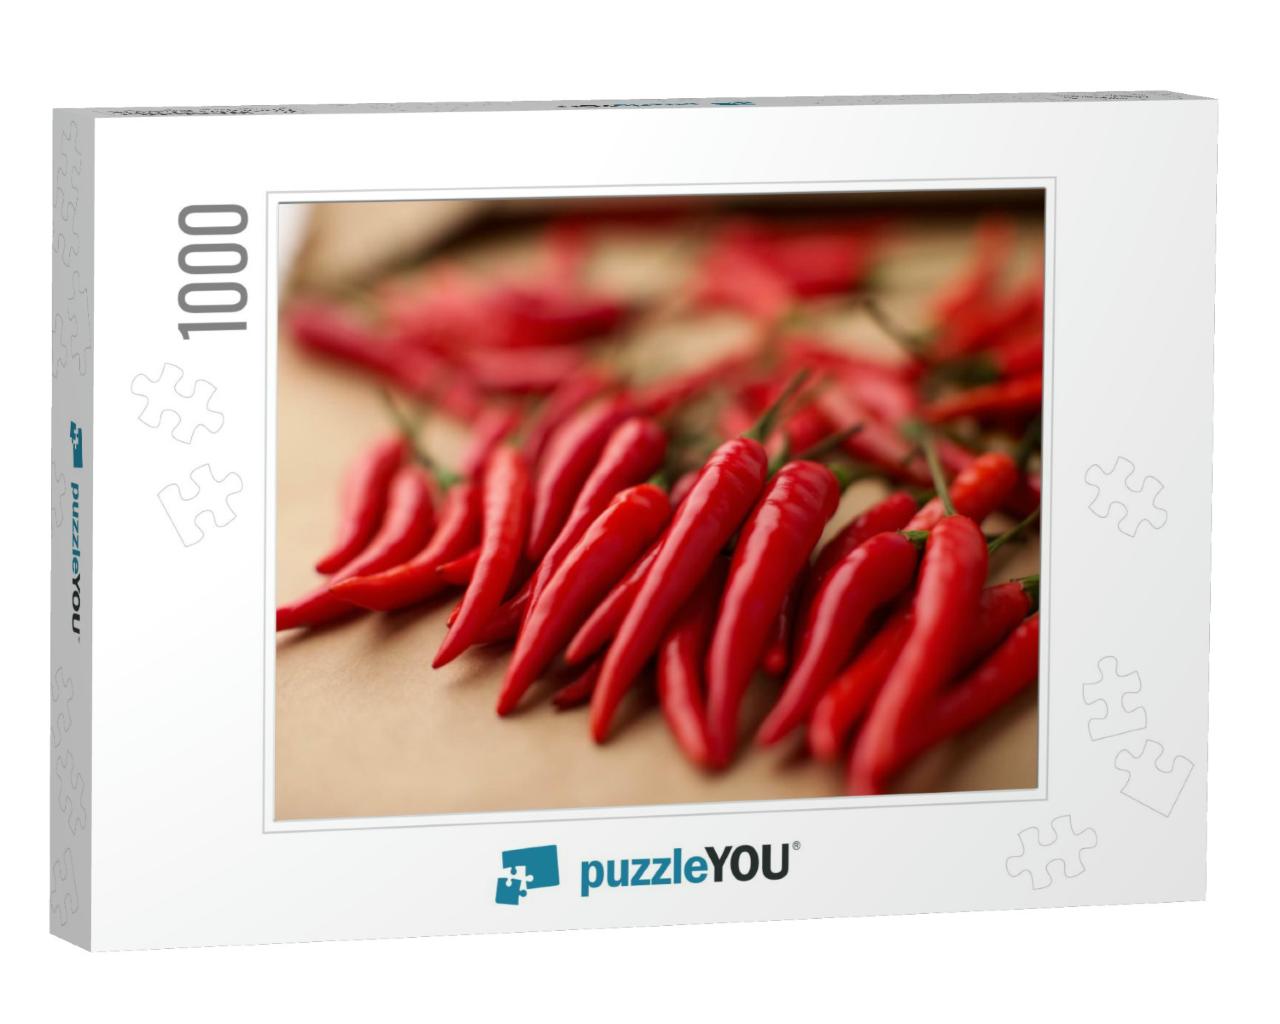 Abstract Nature Blurred Background, Red Hot Chili Pepper... Jigsaw Puzzle with 1000 pieces